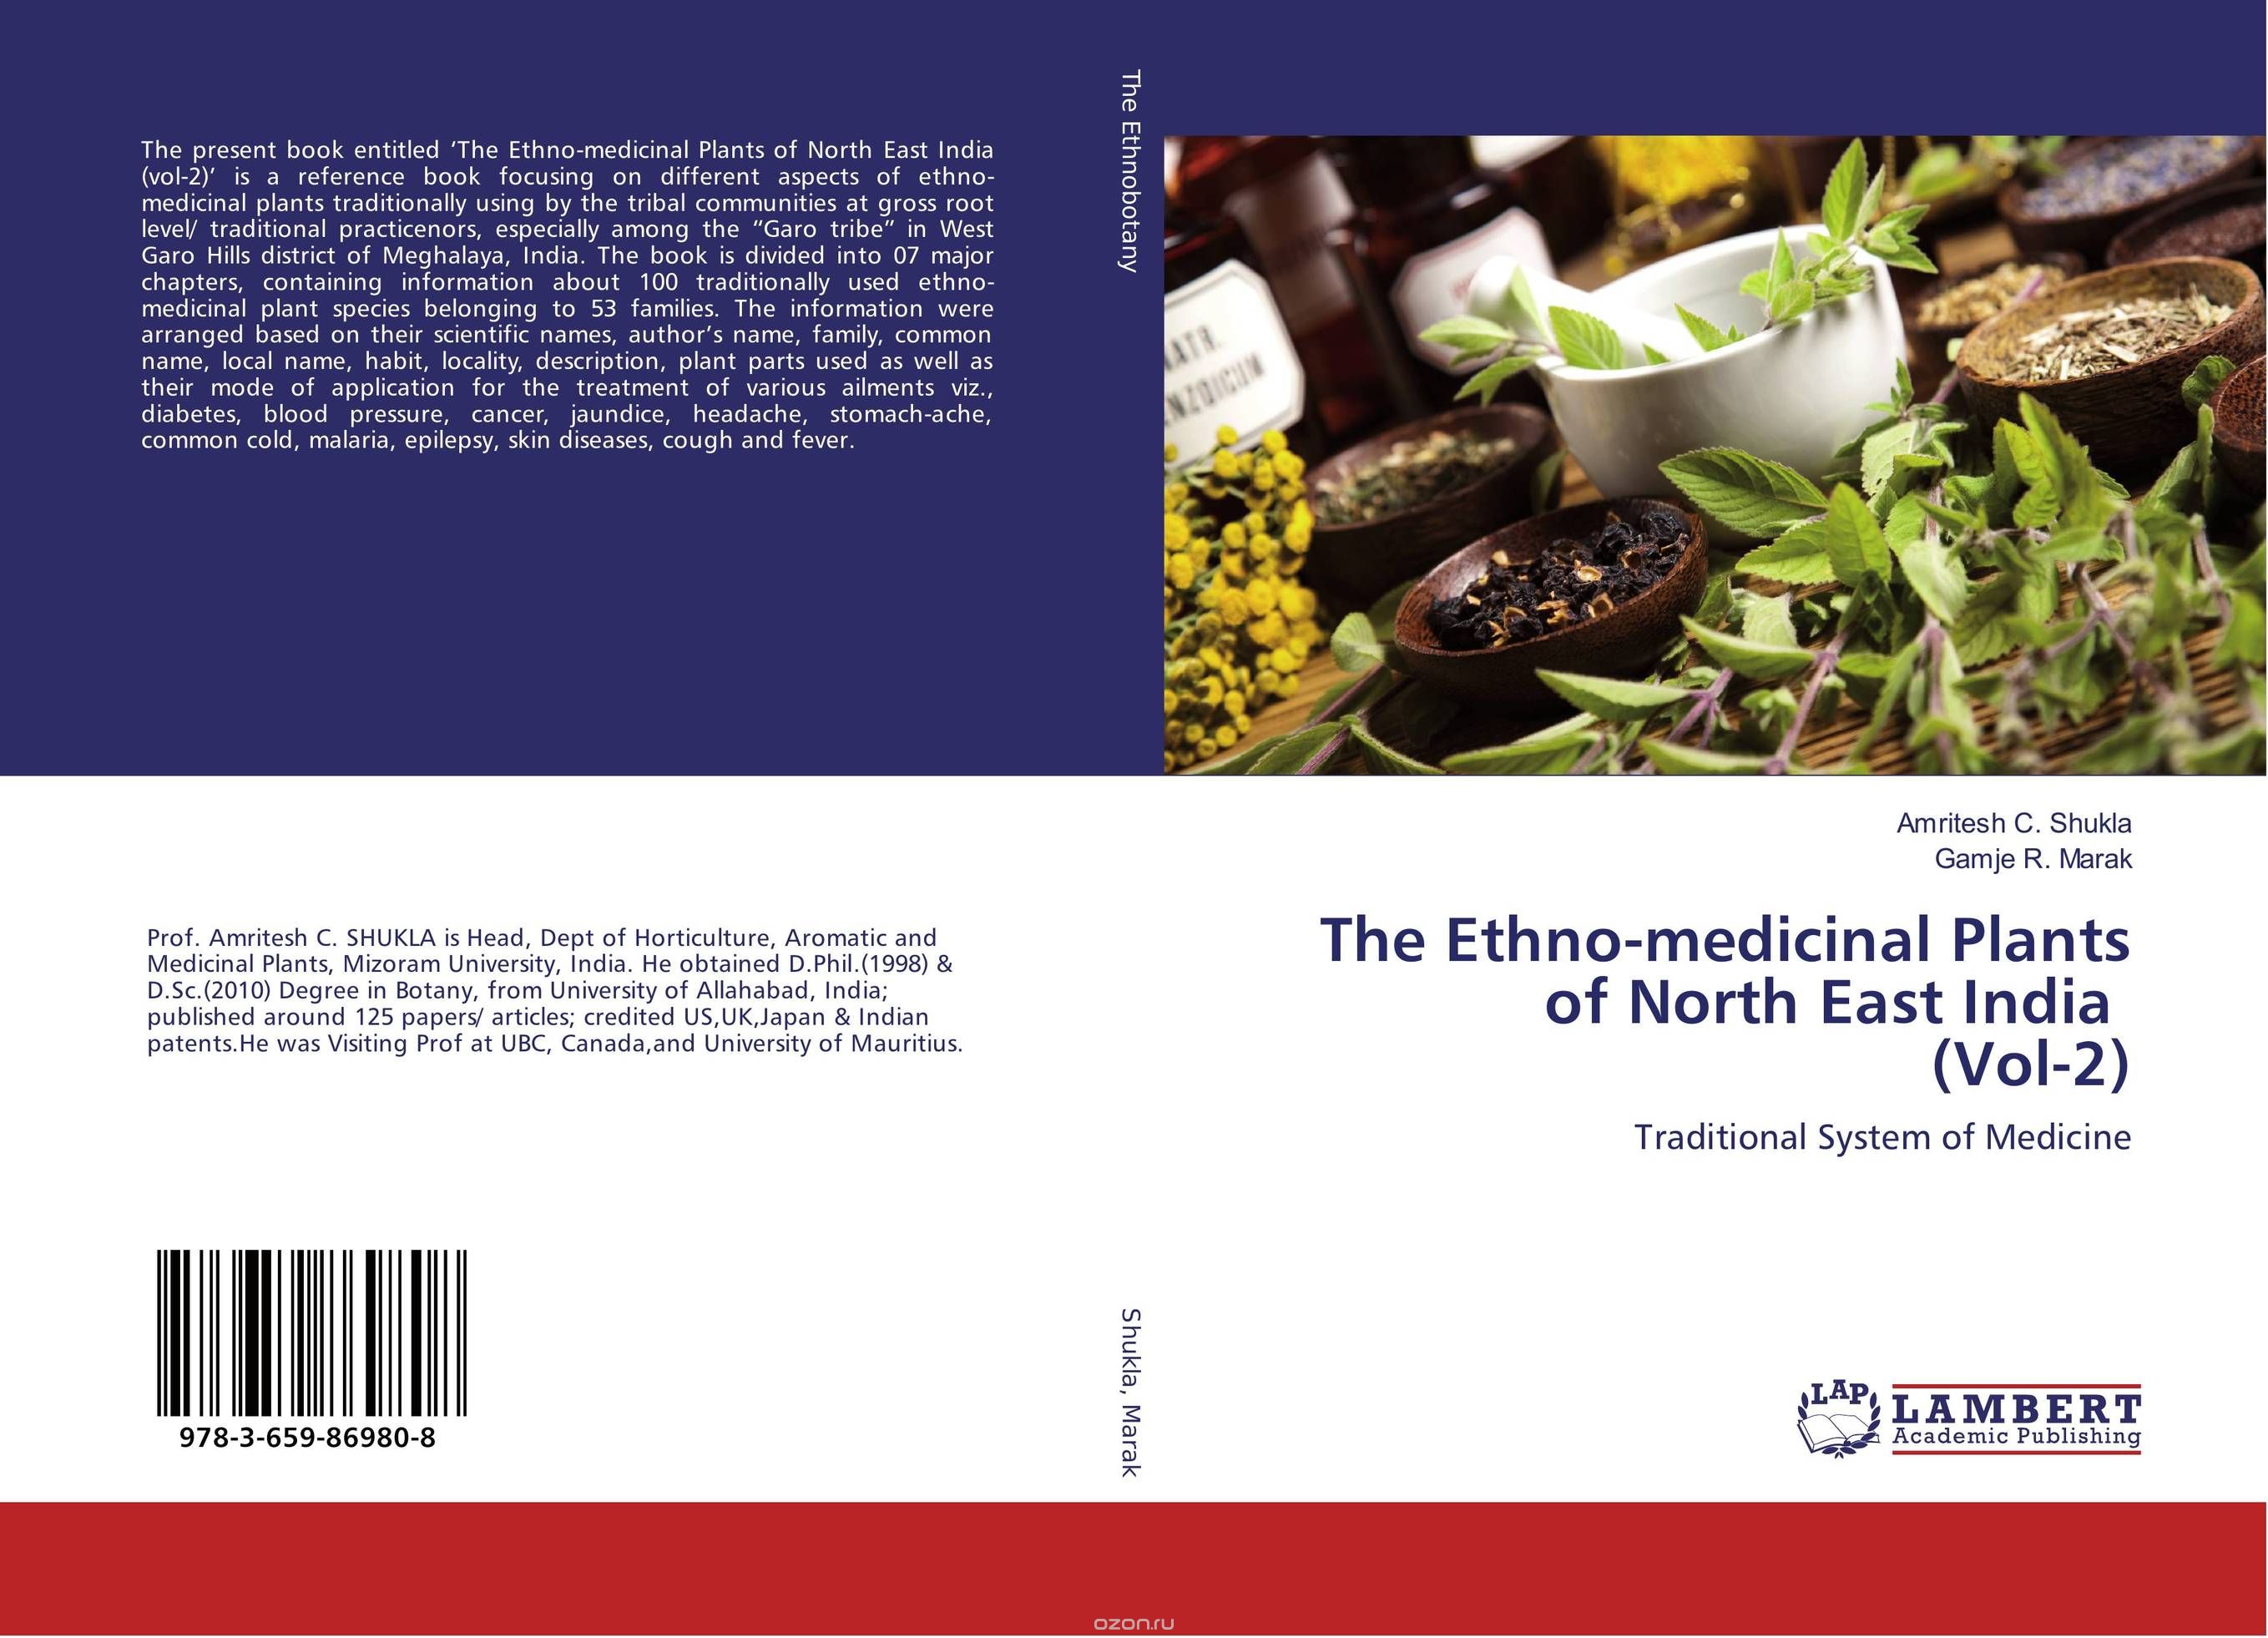 The Ethno-medicinal Plants of North East India (Vol-2)